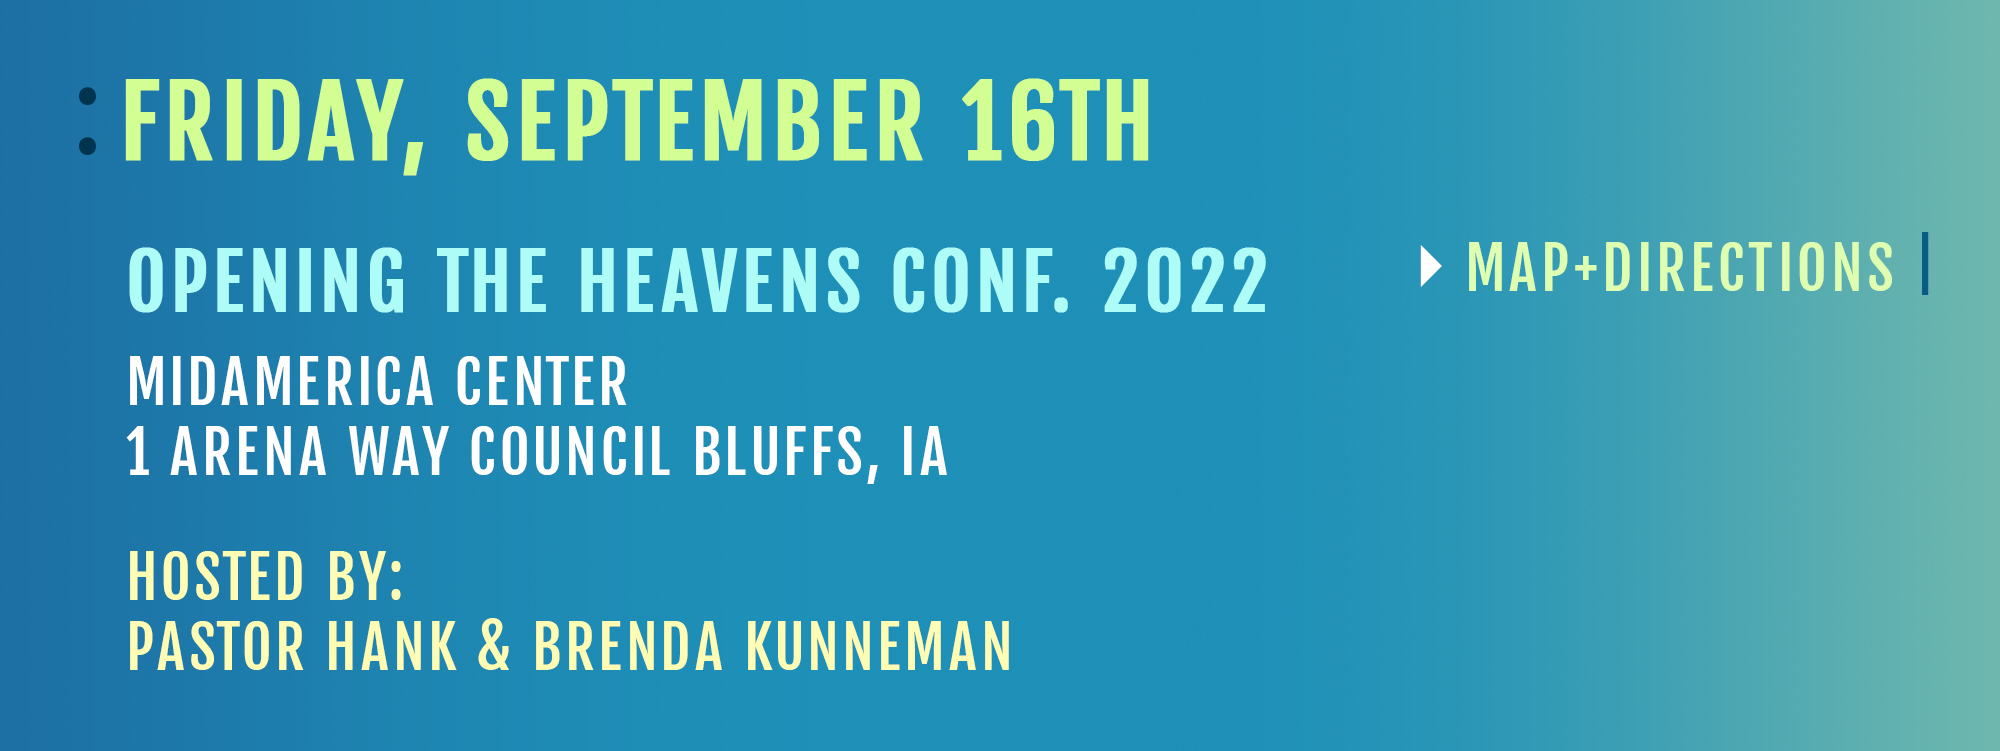 Friday, September 16th Opening the Heavens Conference 2022 Midamerica Center 1 Arena Way Council Bluffs, IA Map + Directions